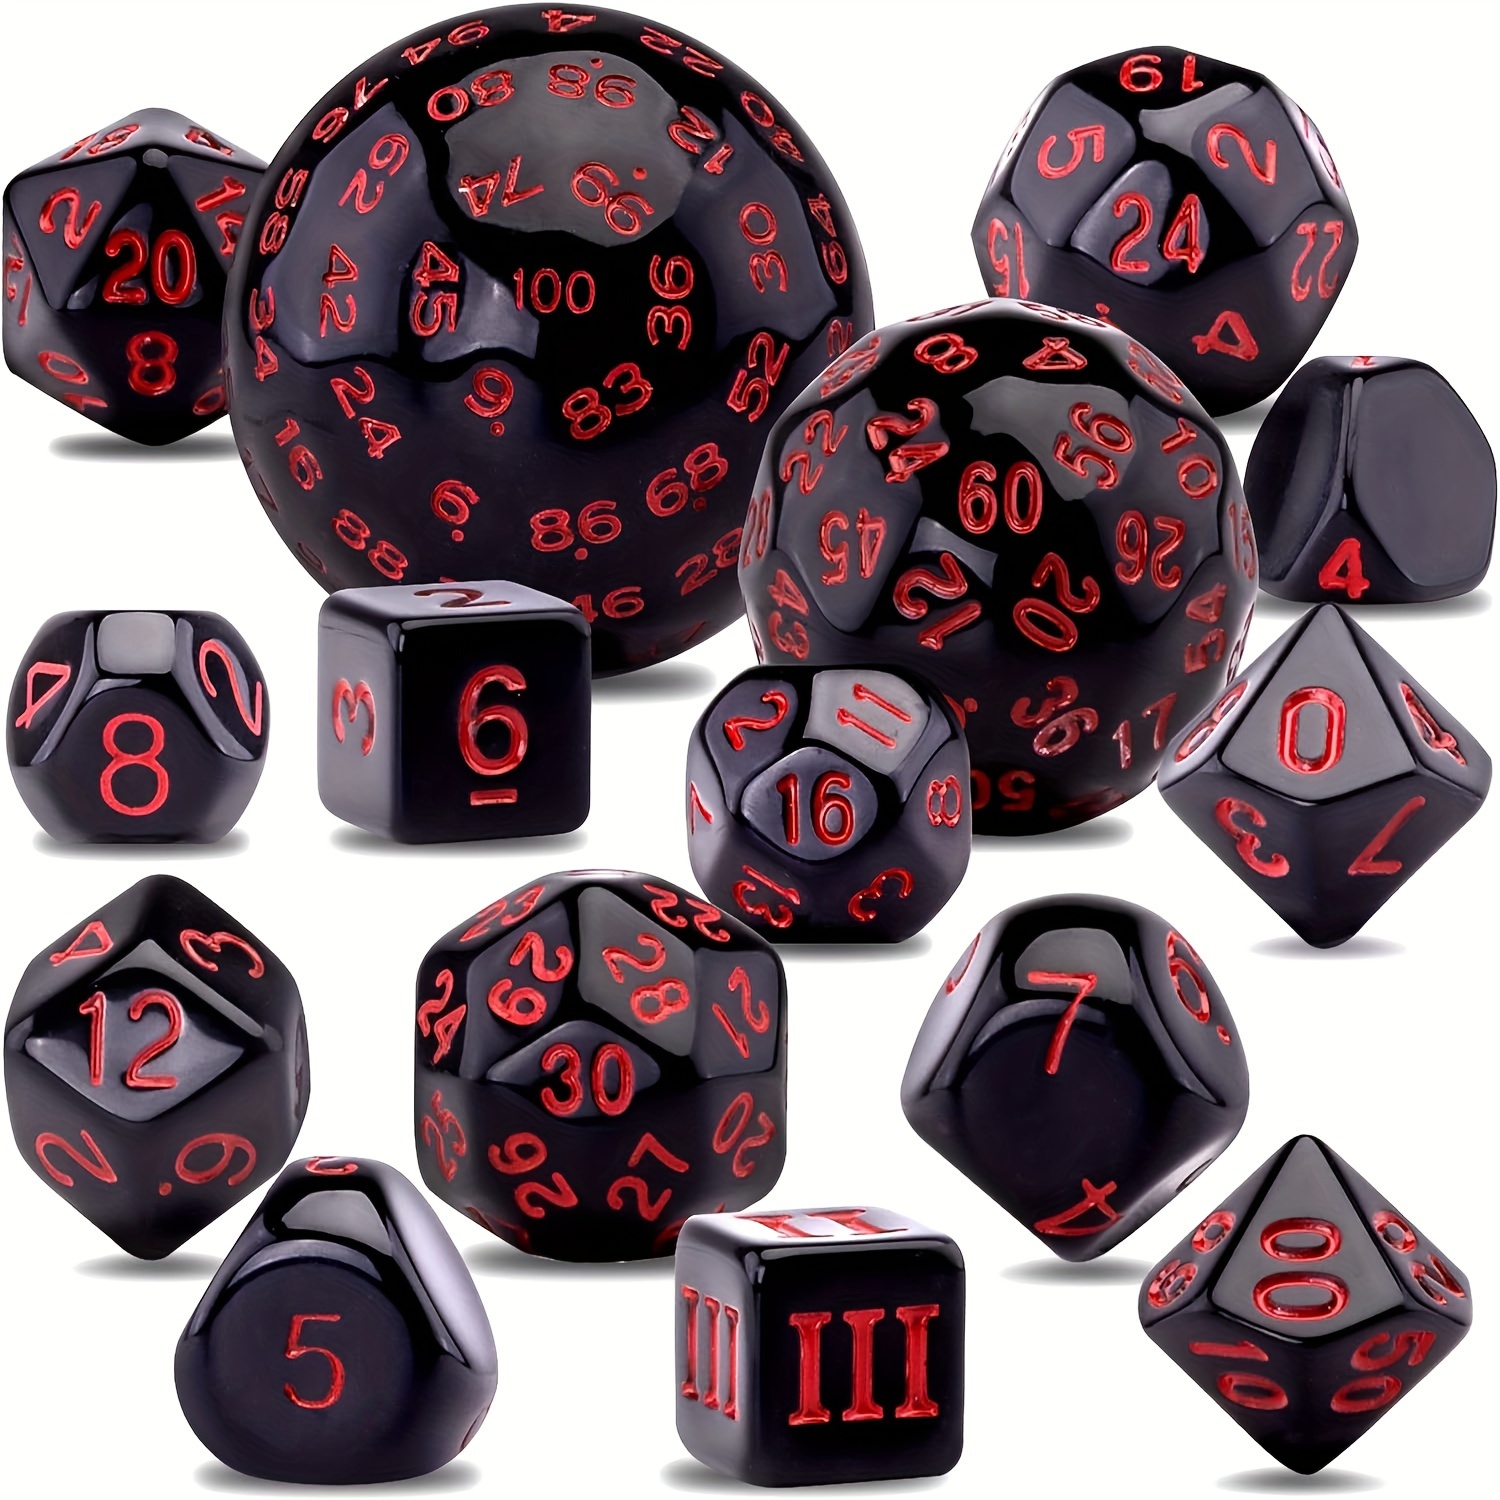 

Esanda Premium Dnd Polyhedral Dice Set - 15 Piece, Easy-to-read Numbers, Durable Acrylic, Includes Drawstring Bag - Perfect For & Roleplaying Games, Black & Red